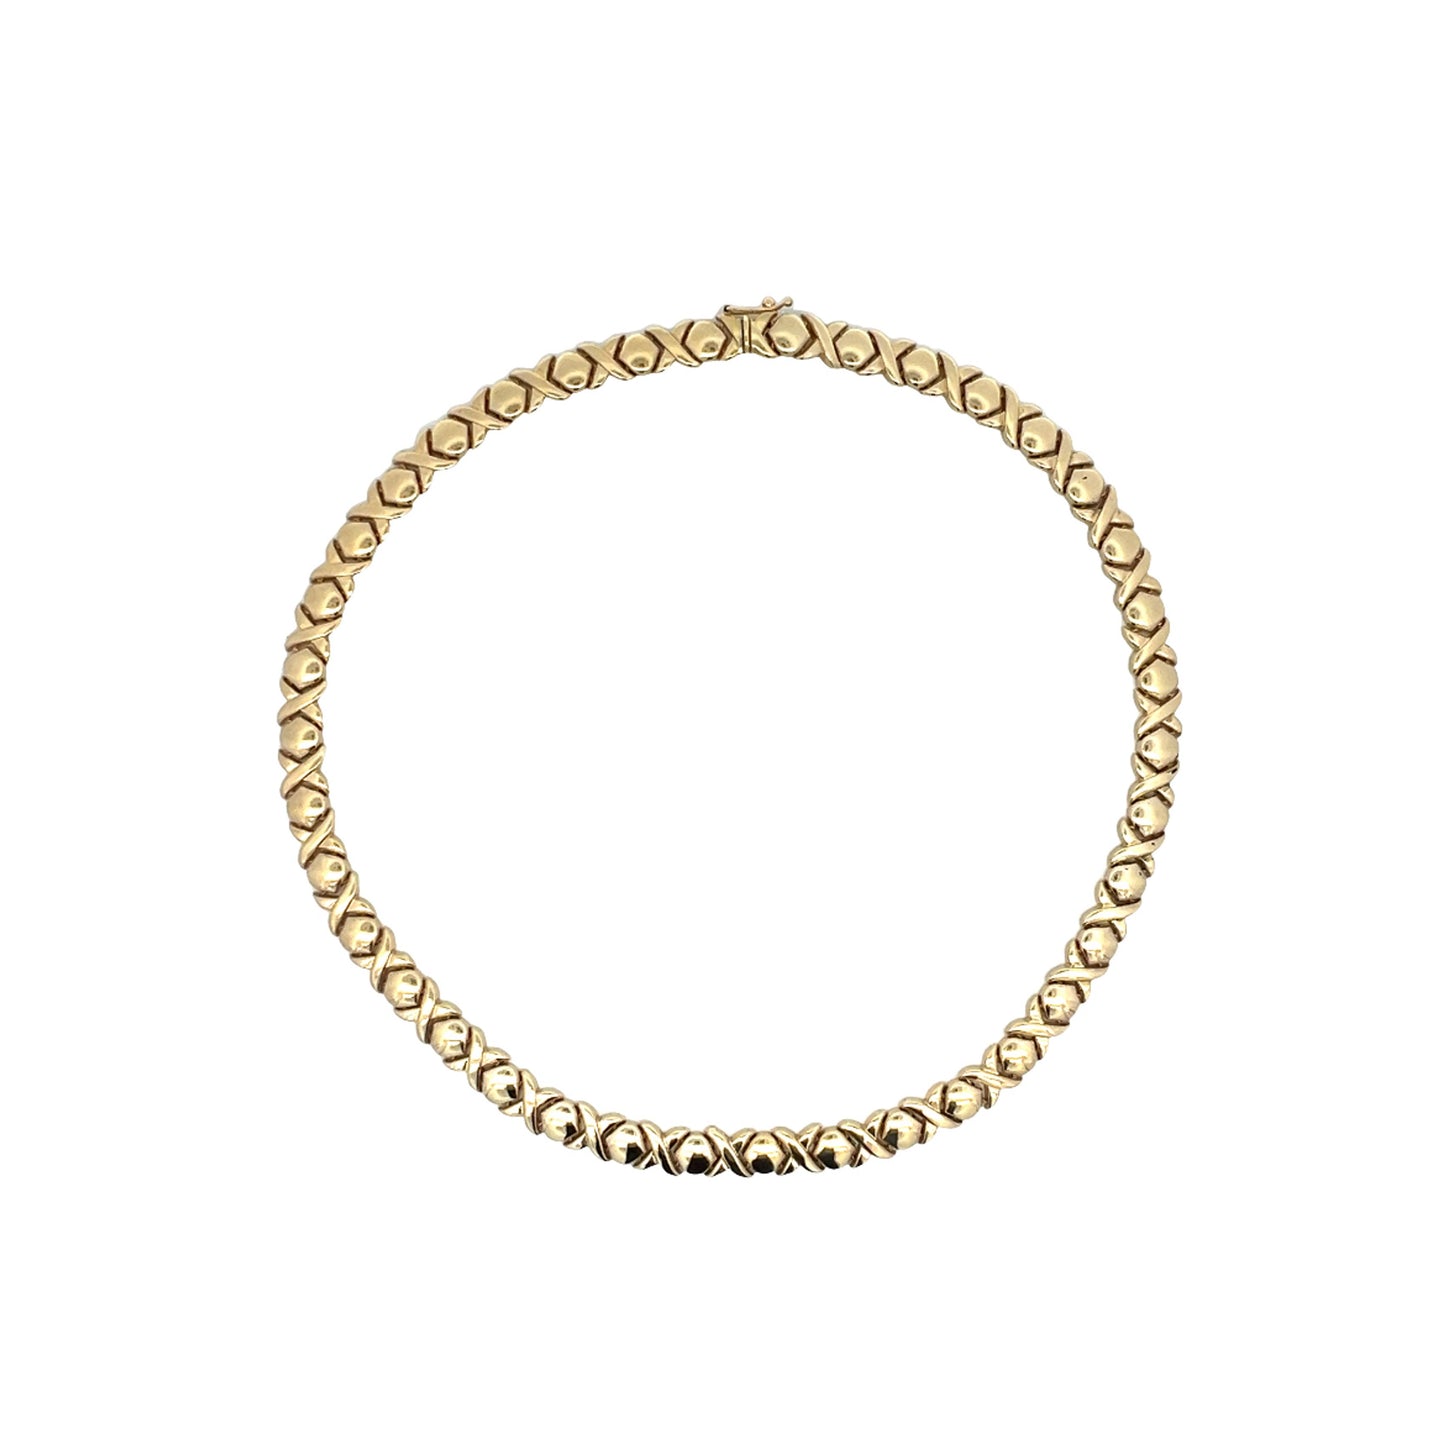 X & O Pattern Necklace in 14k Yellow Gold